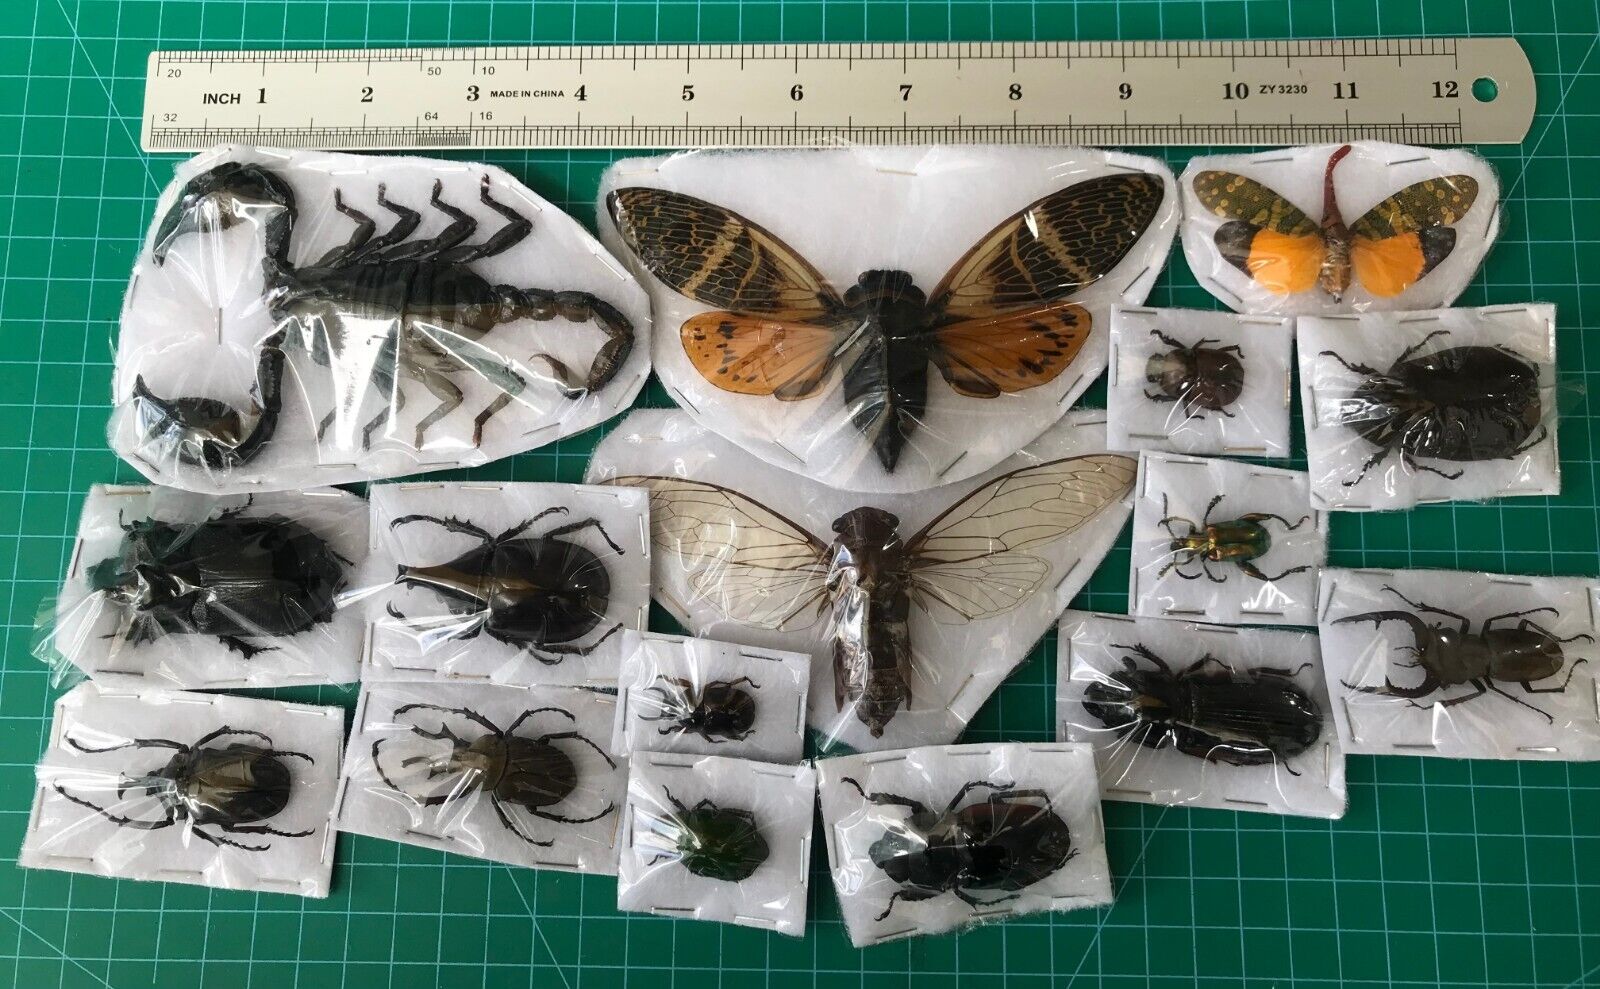 15 Beetle Insects Bugs Real Taxidermy Butterflies Dried Oddities Decor